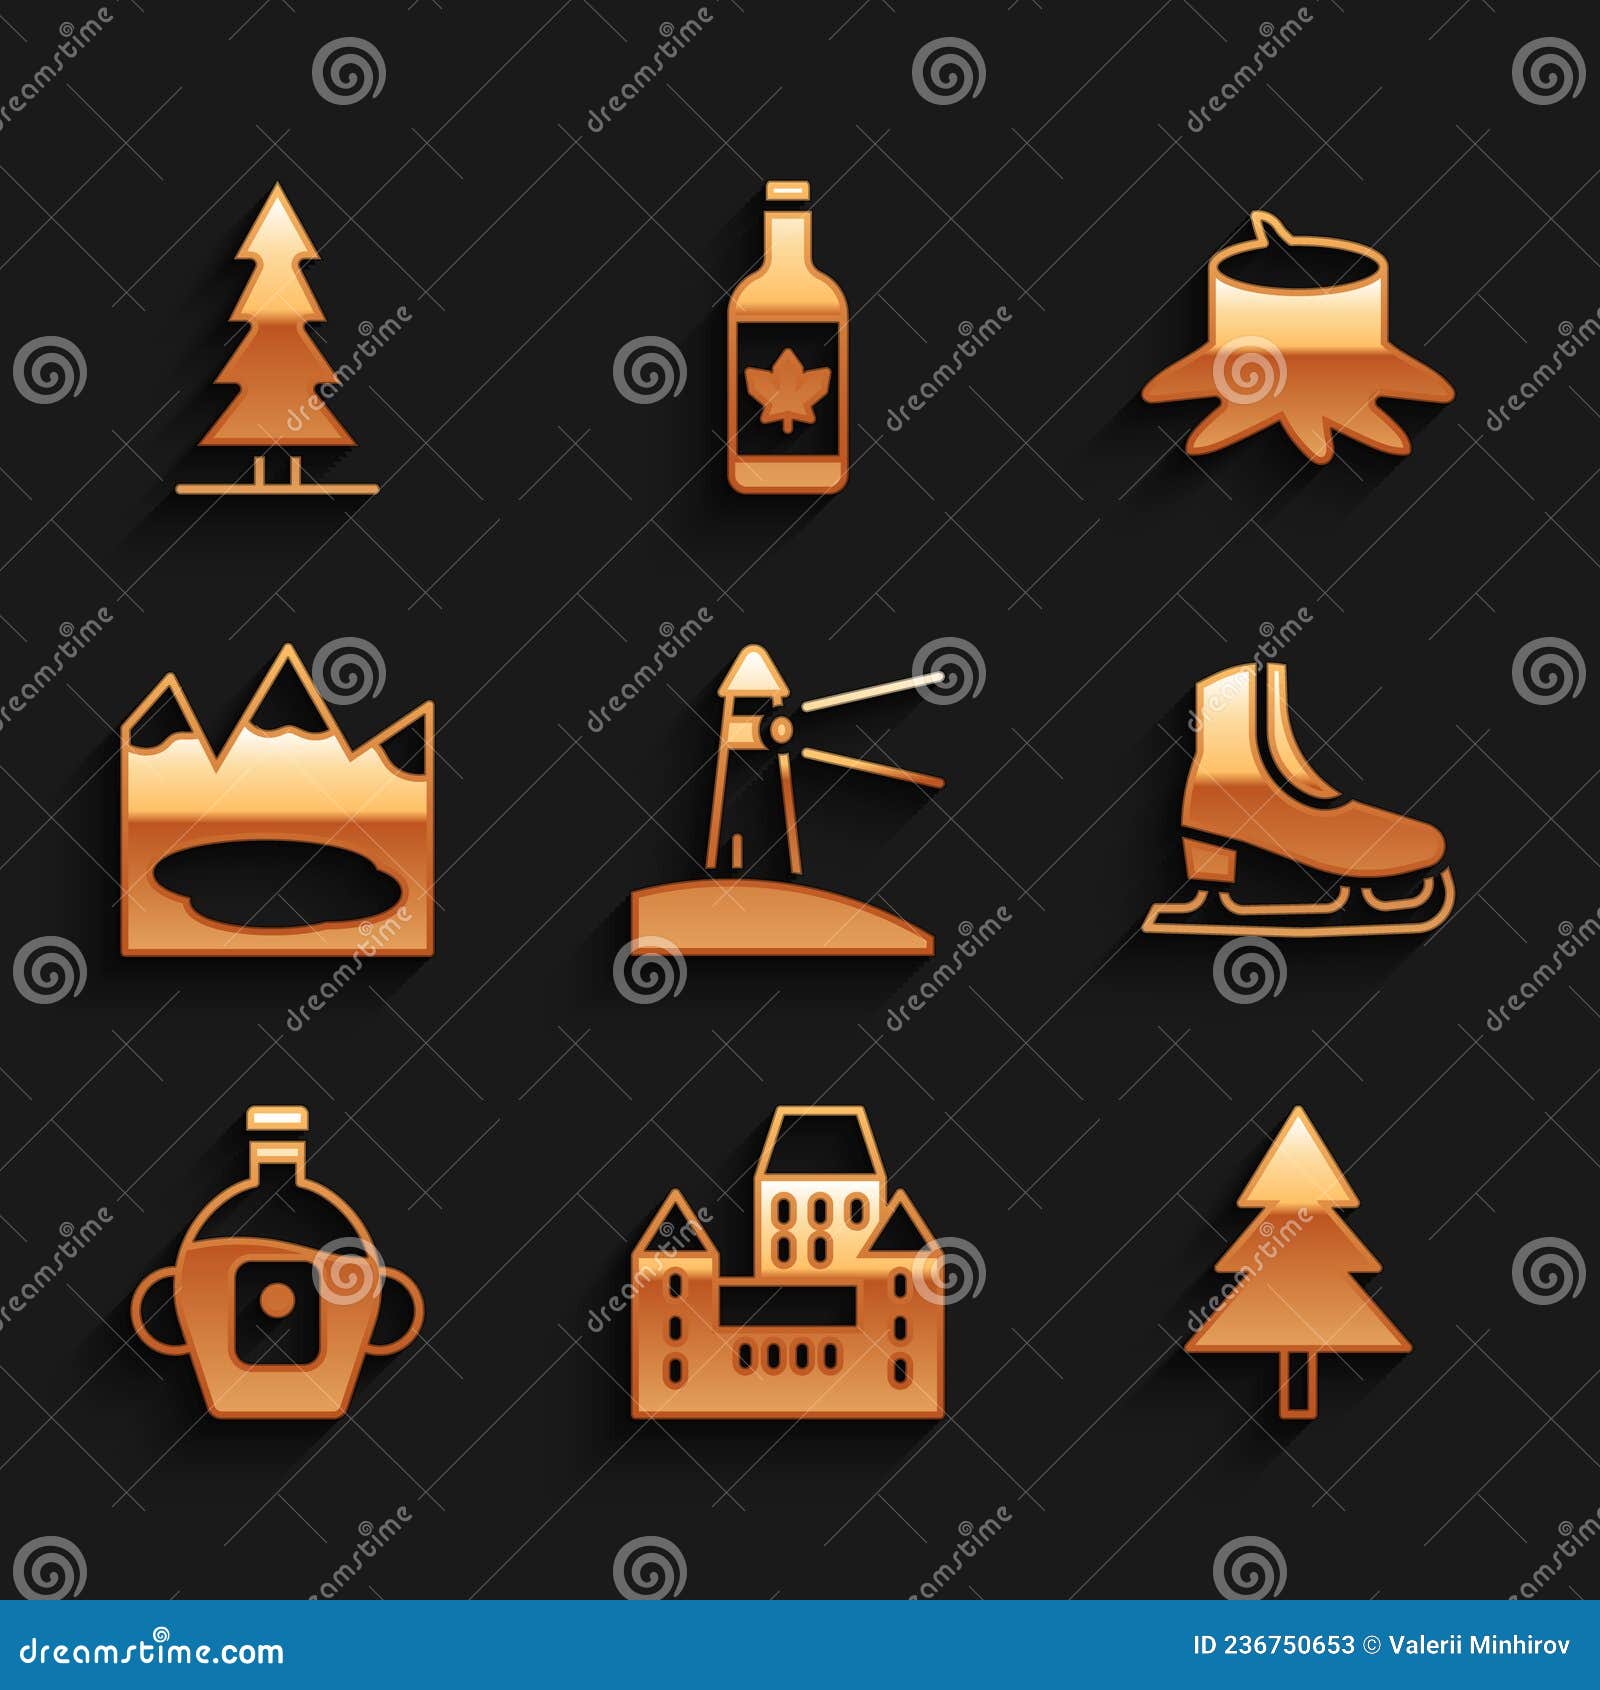 Nautical Merry Christmas Stock Illustrations – 52 Nautical Merry Christmas Stock Illustrations, Vectors & - Dreamstime